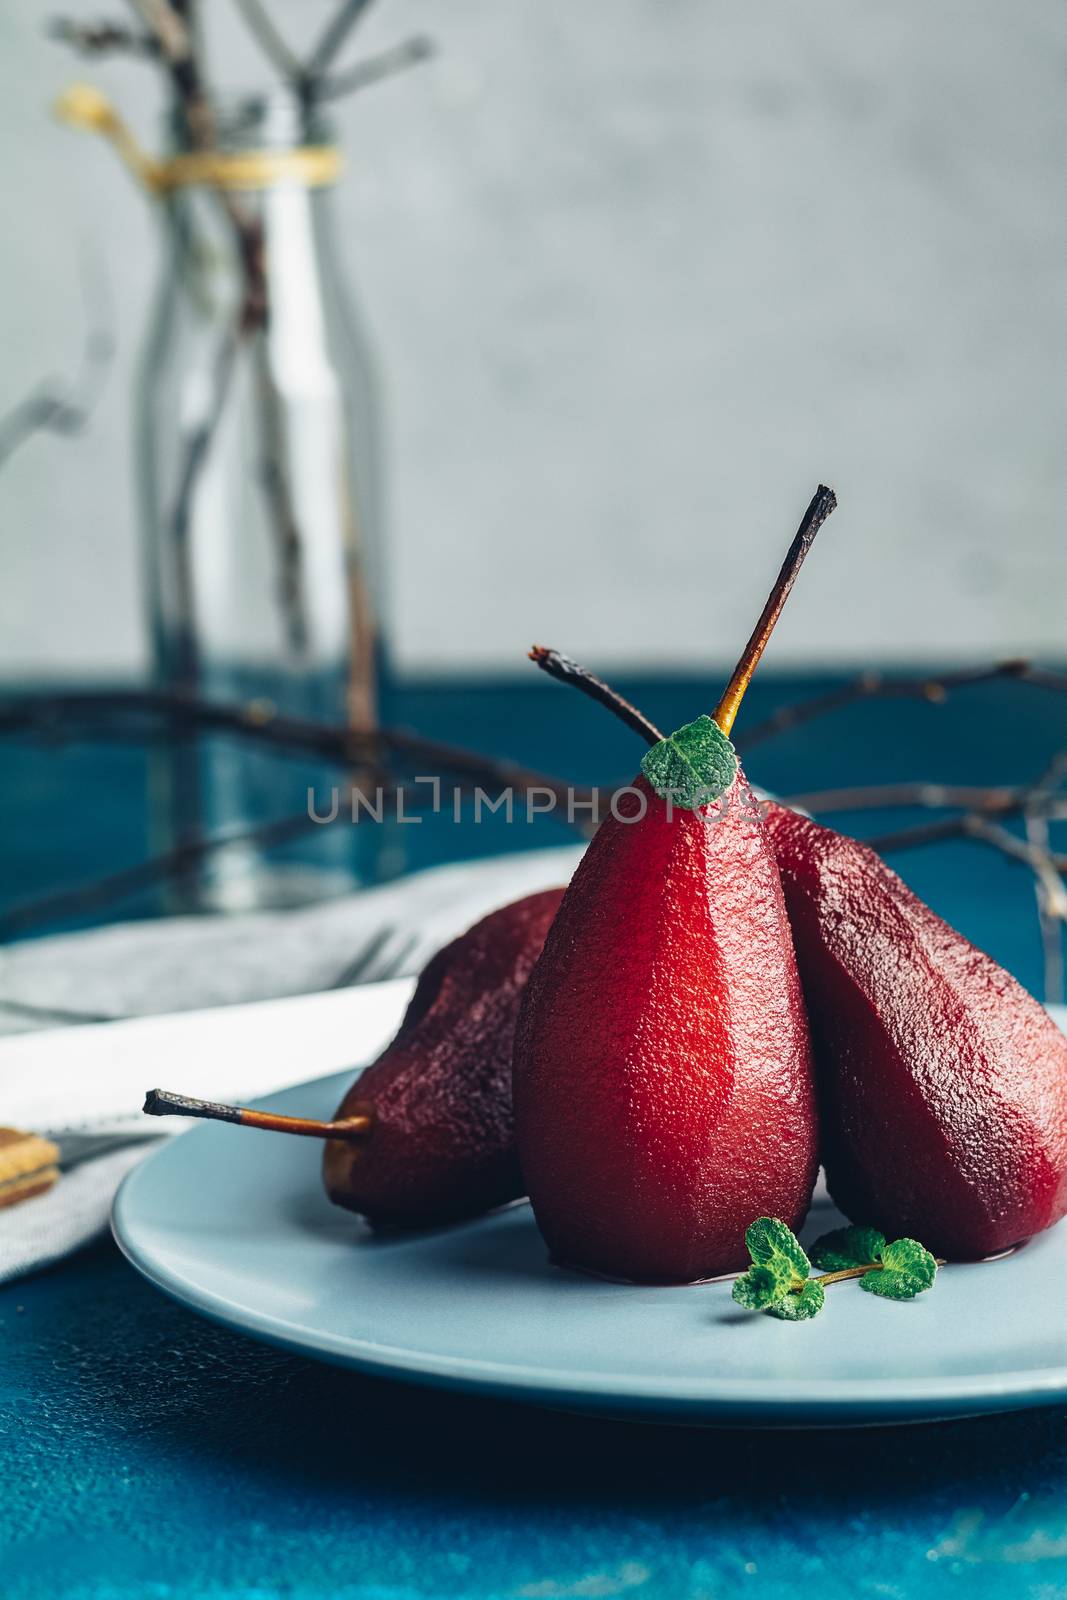 Pears in wine. Traditional dessert pears stewed in red wine with chocolate sauce on plate on blue concrete surface. Concept for romantic dinner dessert. Simple Paleo style dessert pear poached in pomegranate juice.